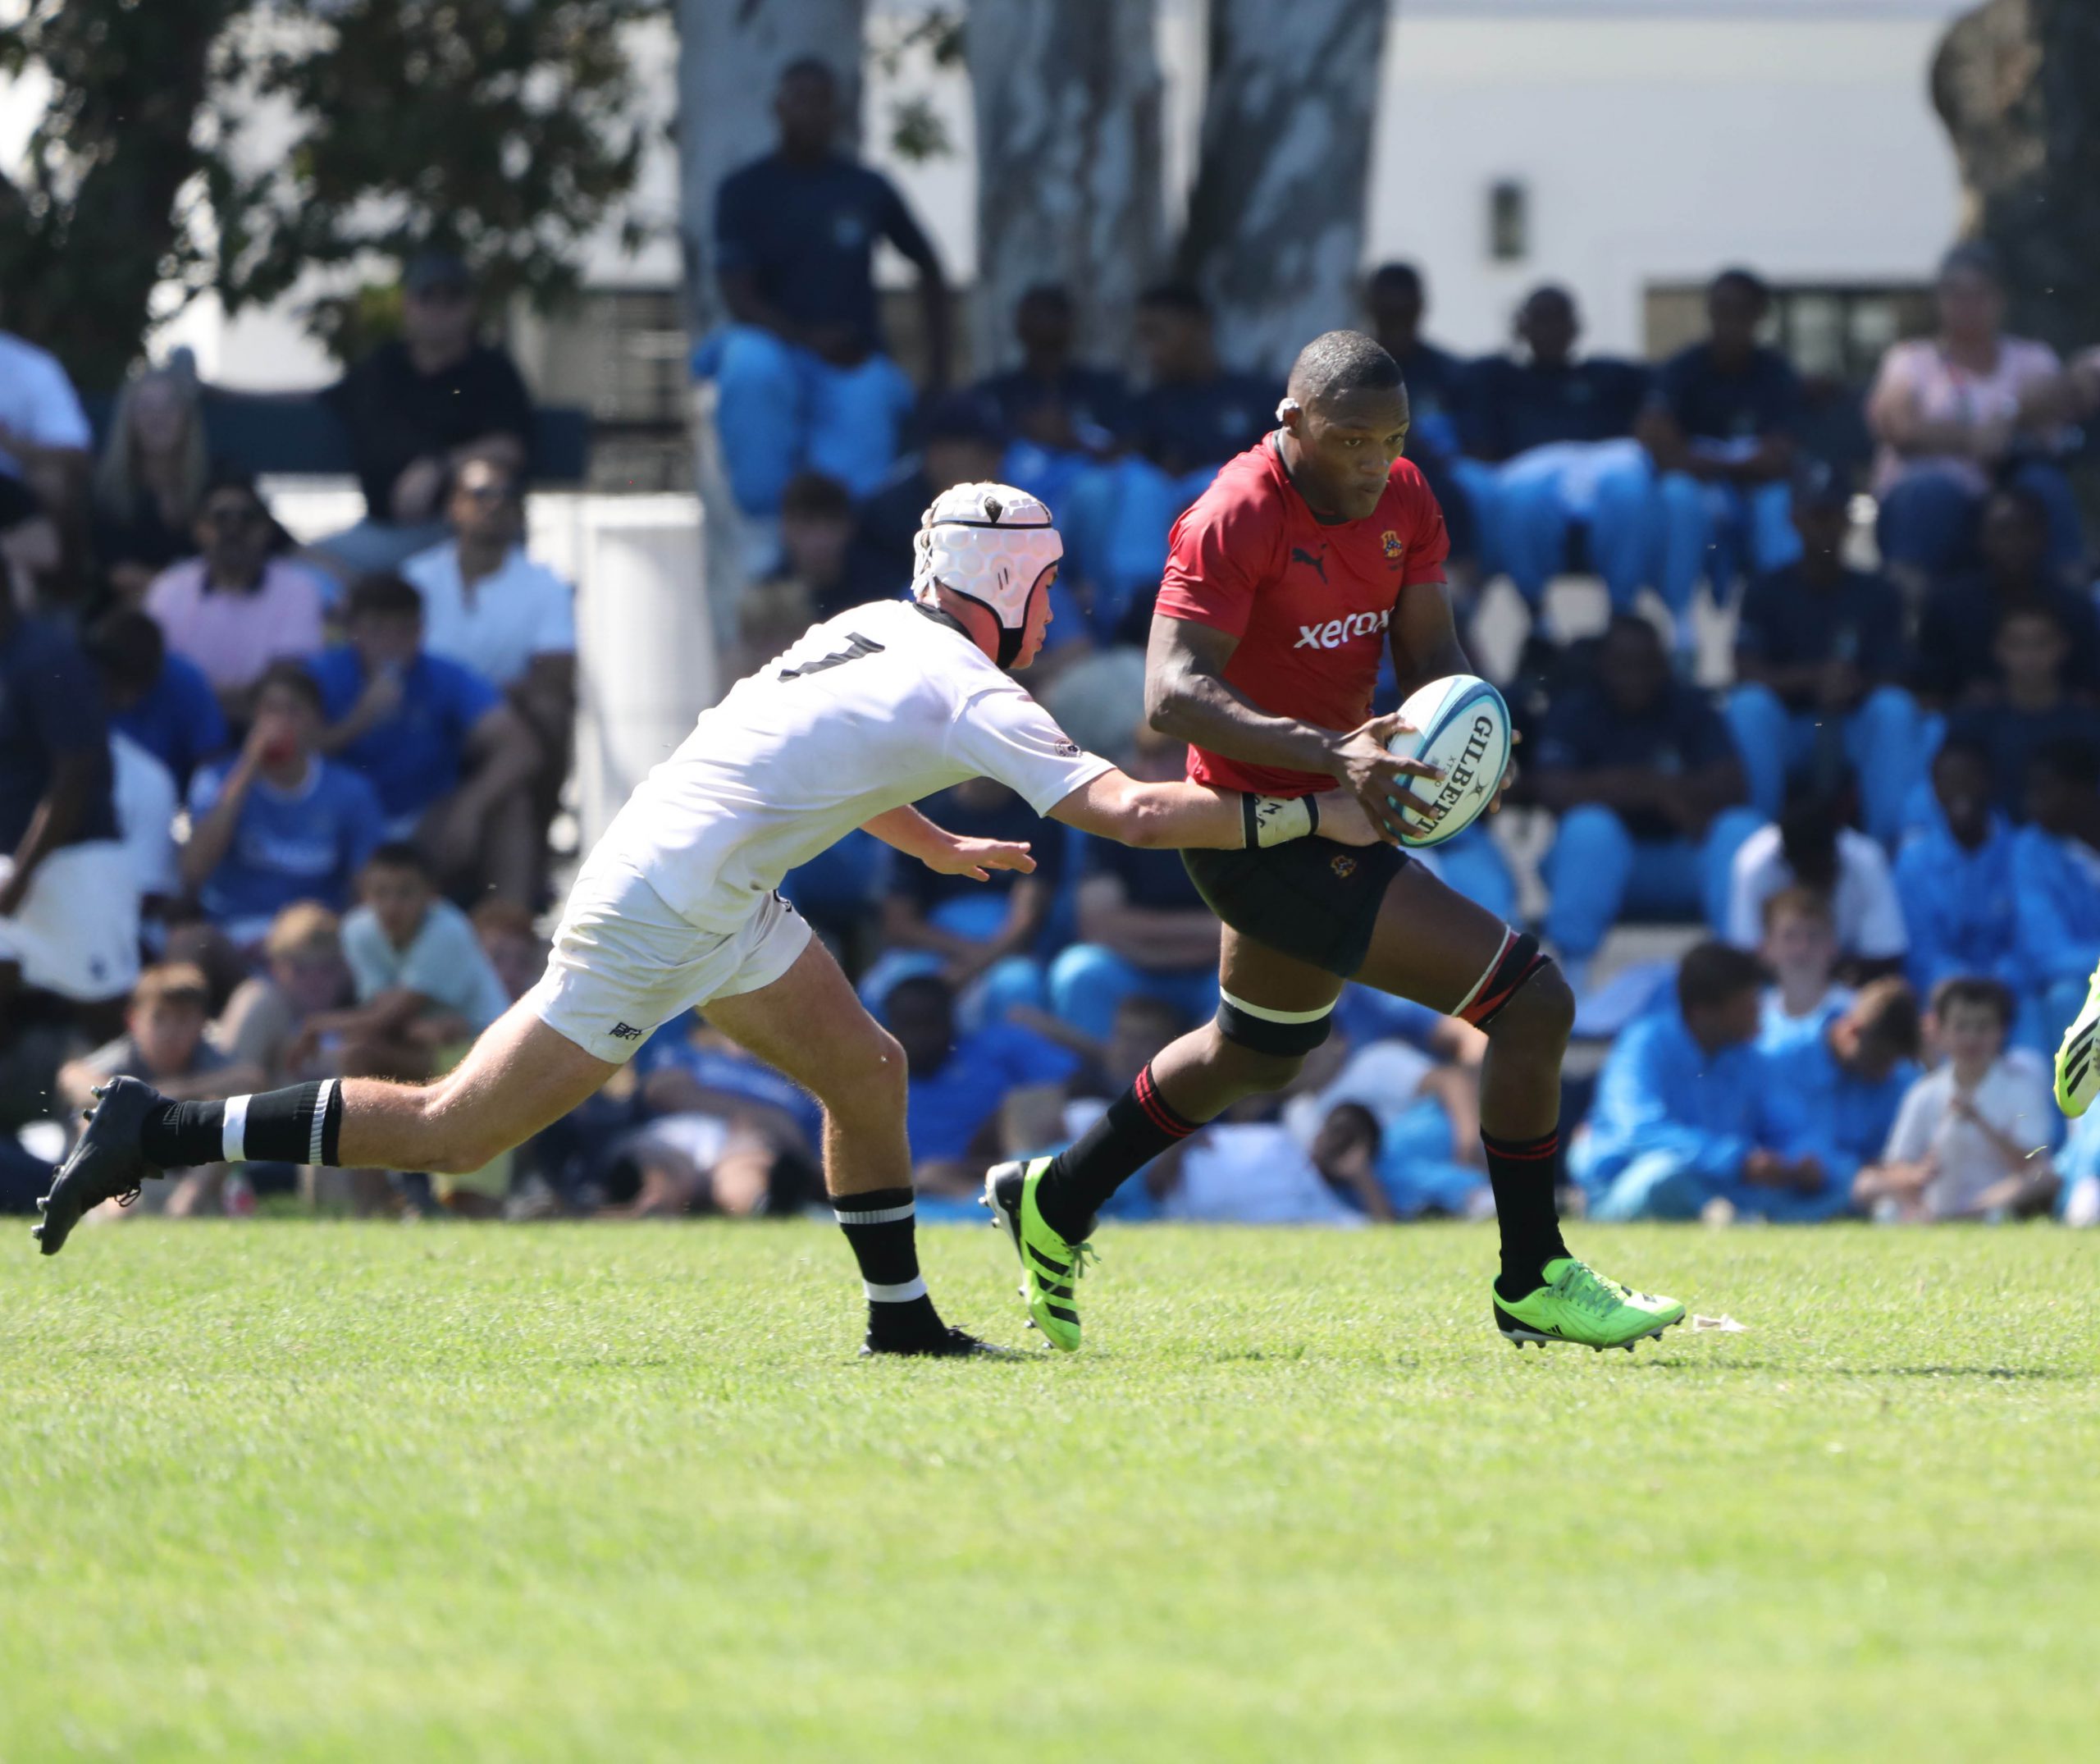 Kingswood Collegeflanker Sipho Nonyalela avoids a tackle by HIlton College. Kingswood College beat Hilton 26-25 in a closely contested game at Bishops. Photo: Jackie Clausen